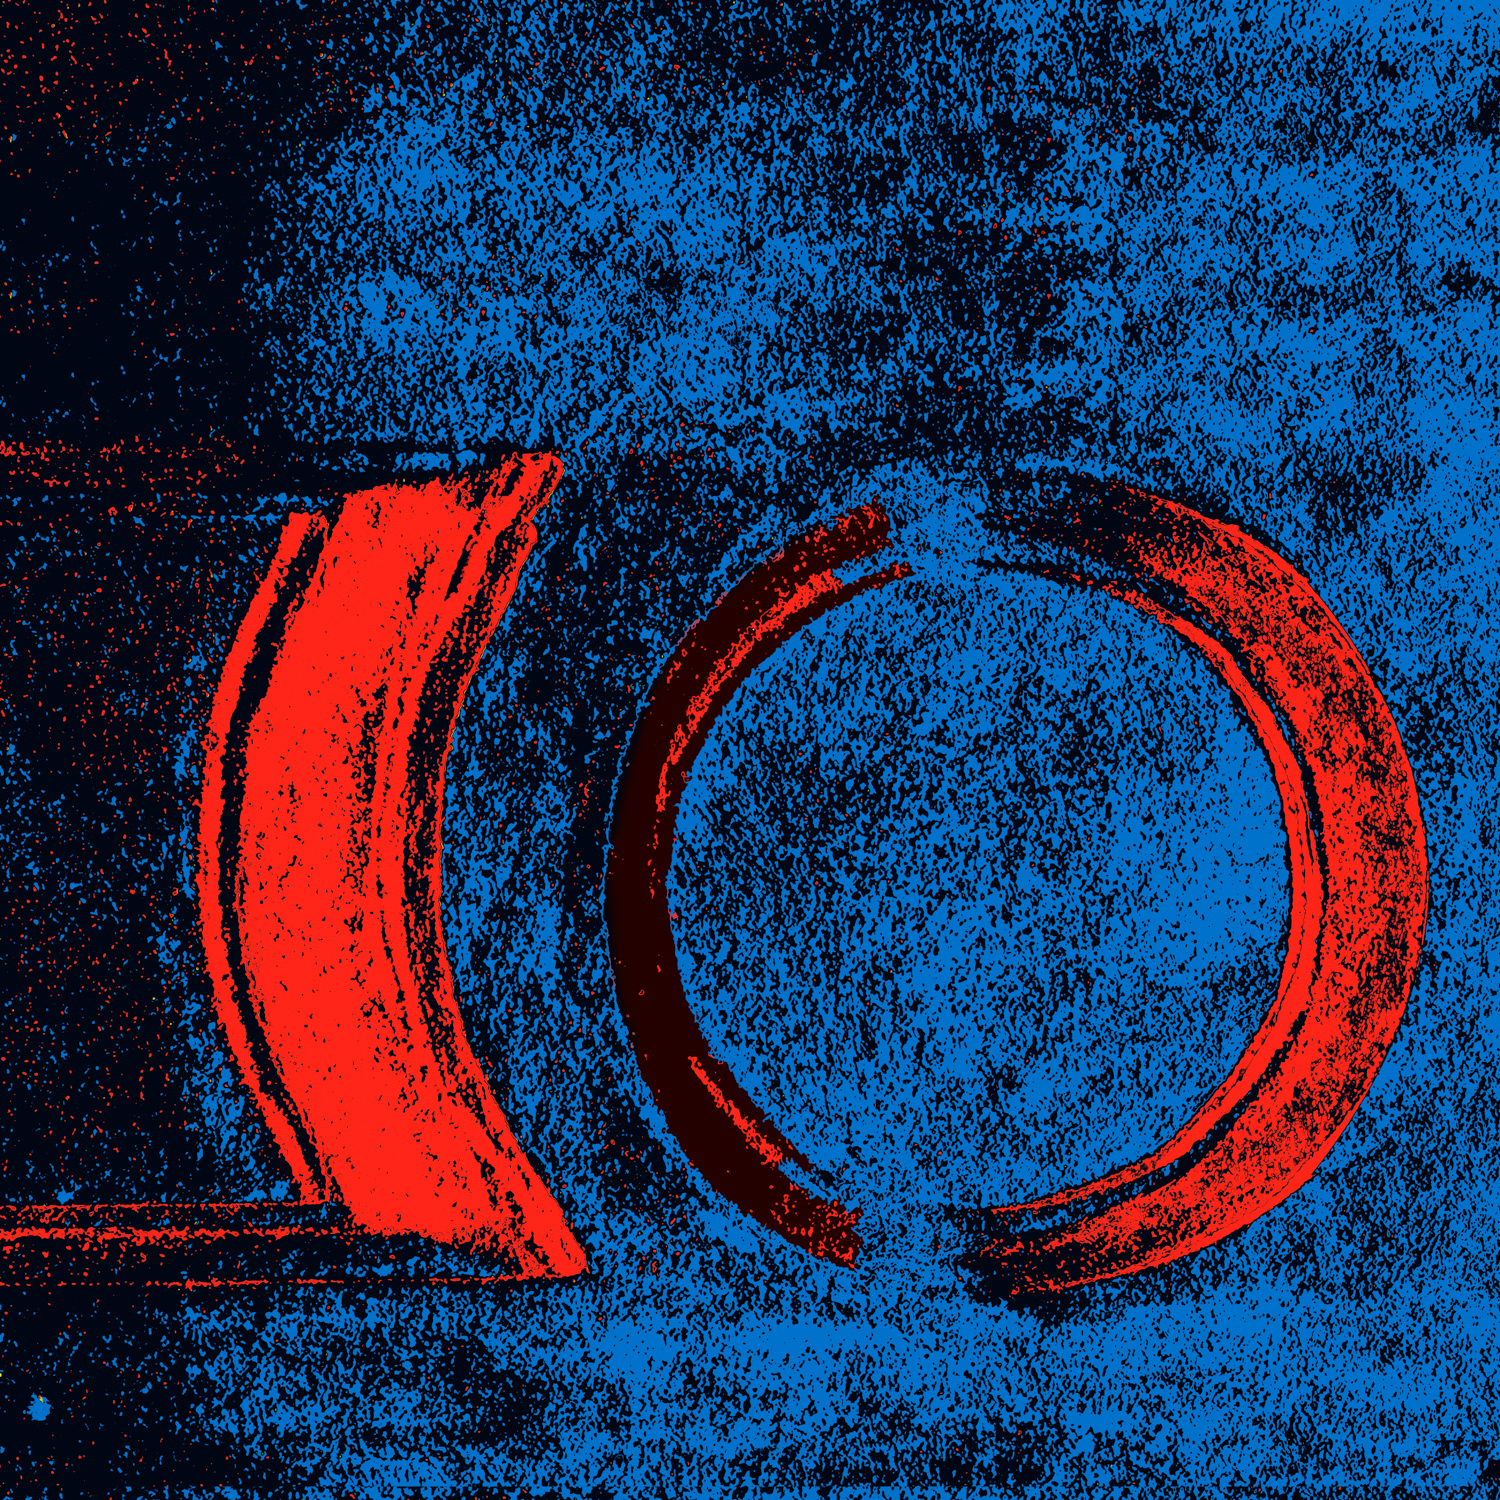 A red ring on the blue background